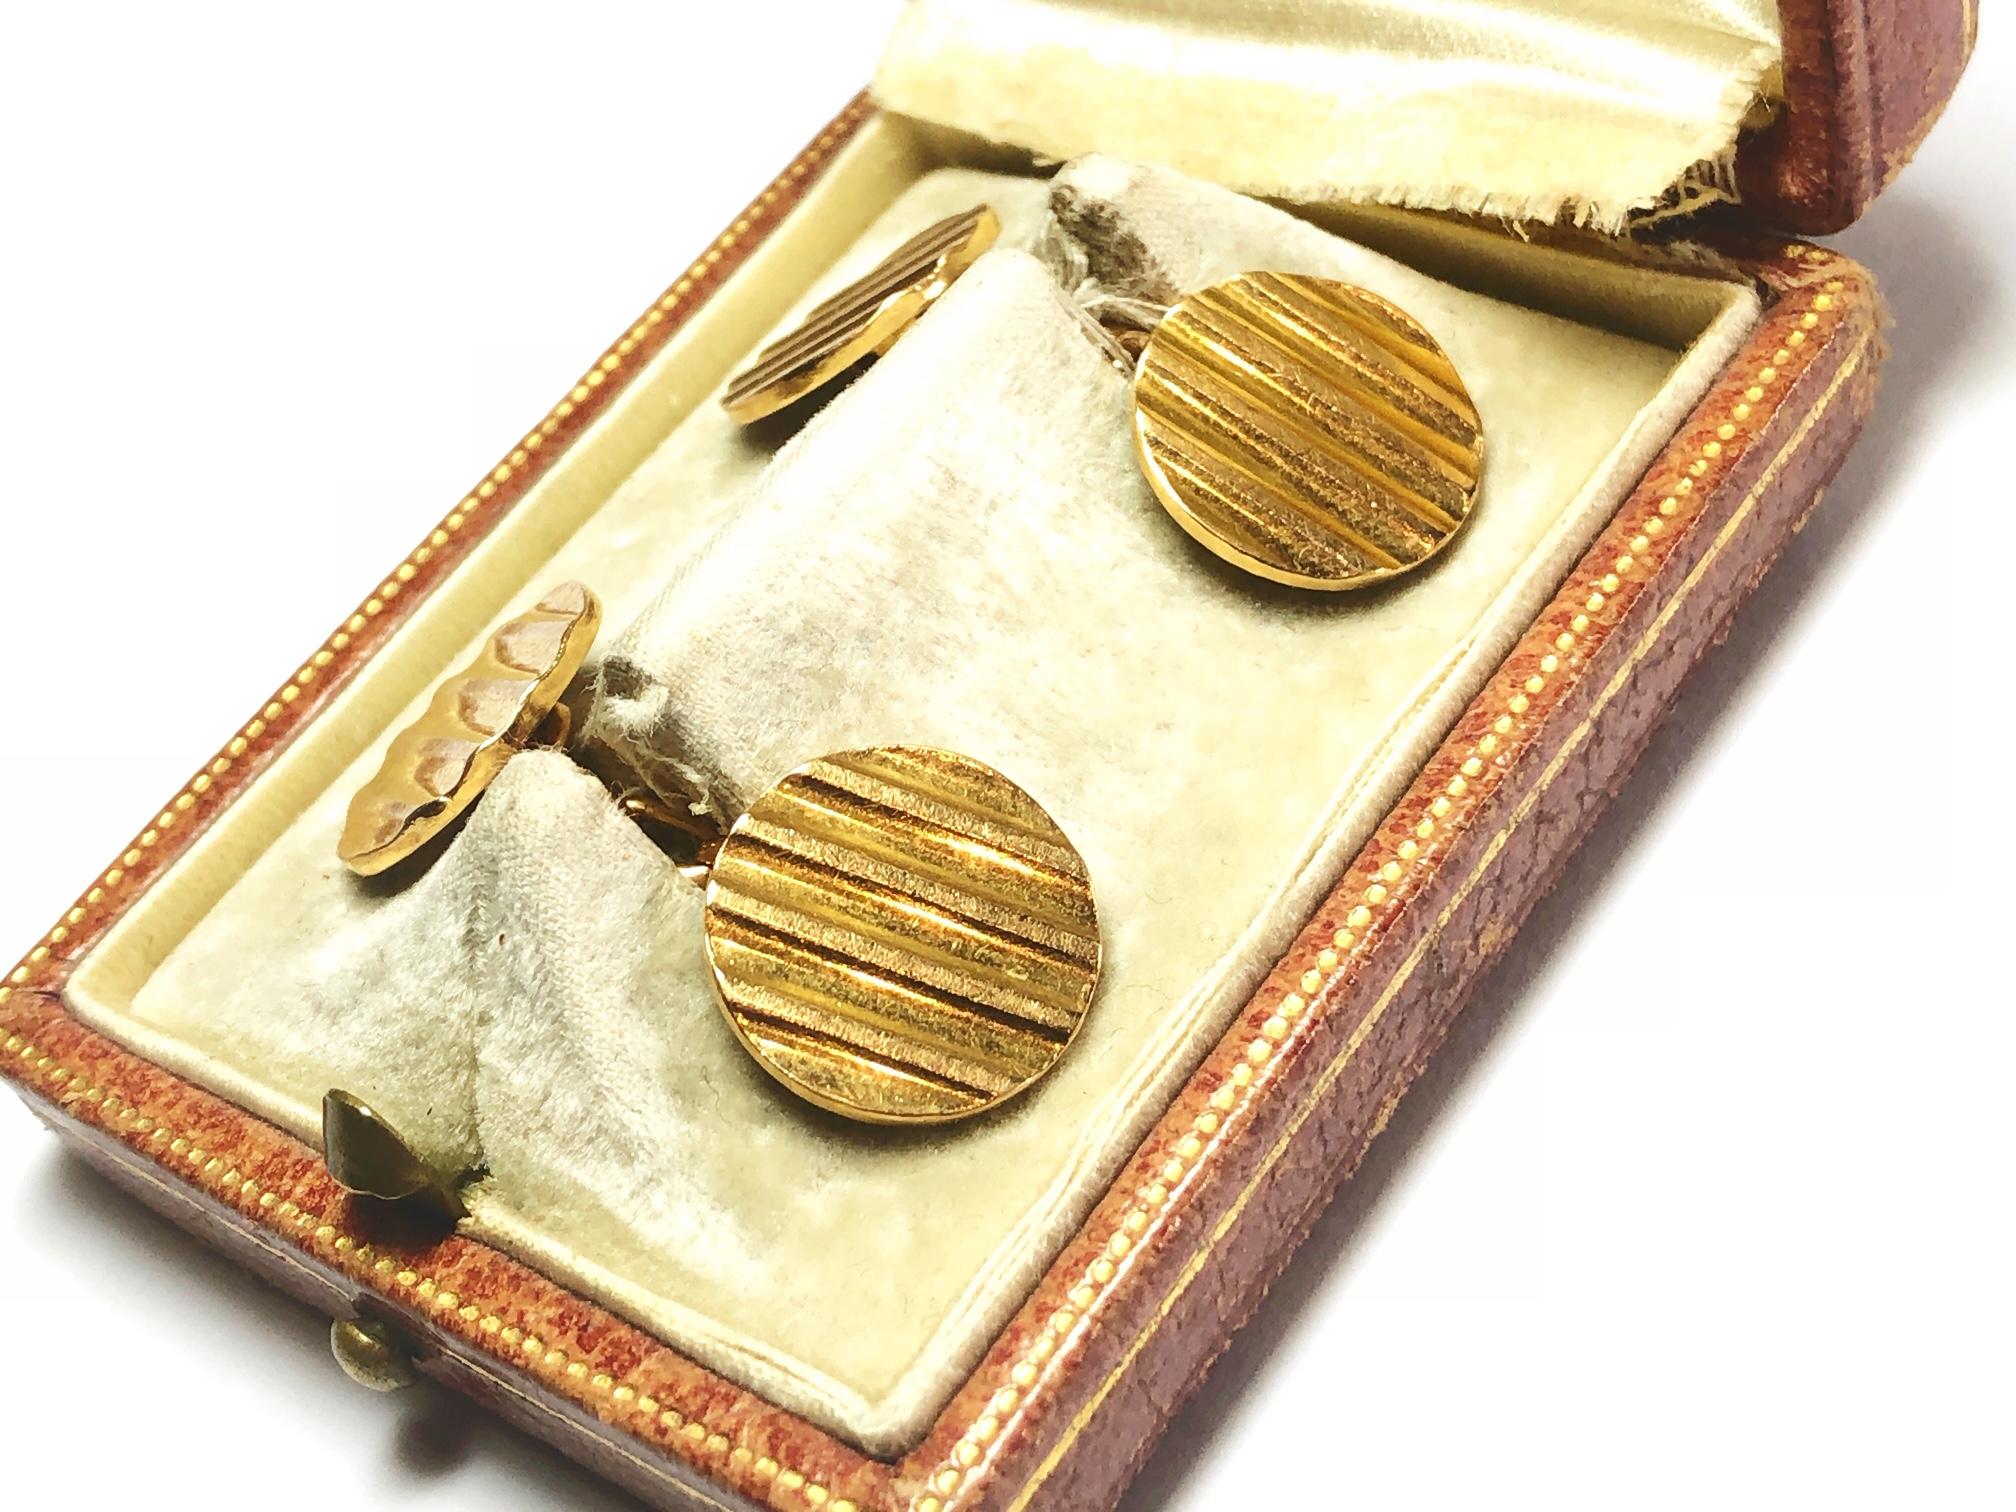 A pair of circular gold cufflinks, each link with a ribbed textured face, with chain link fittings, mounted in 18ct yellow gold, with French marks. Circa 1965.